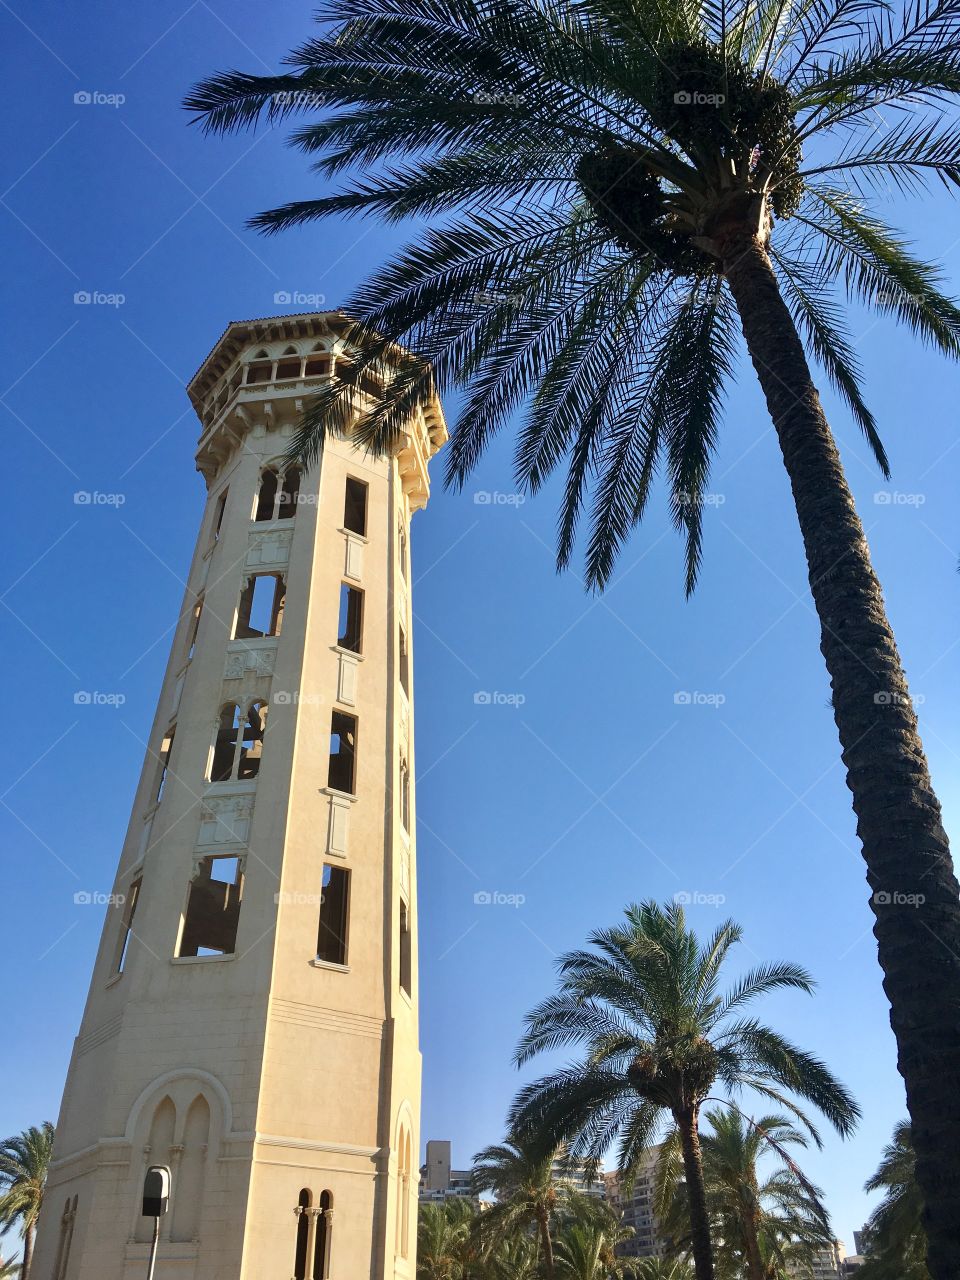 Tower and palms